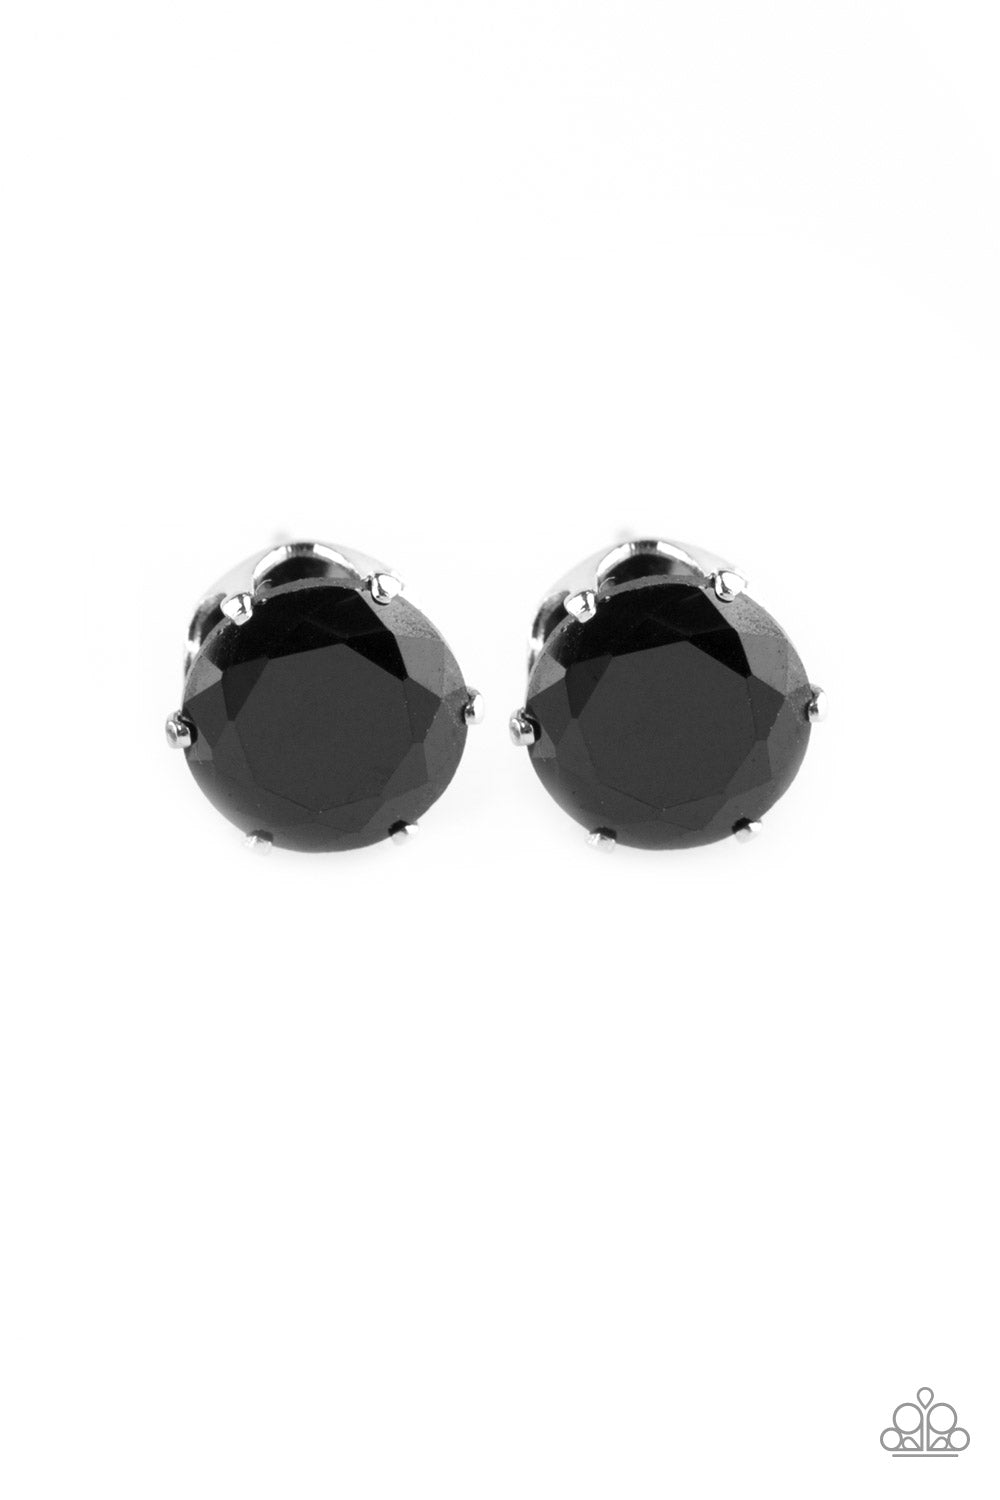 Paparazzi Earrings-  Come Out On Top - Black - SHOPBLINGINGPRETTY